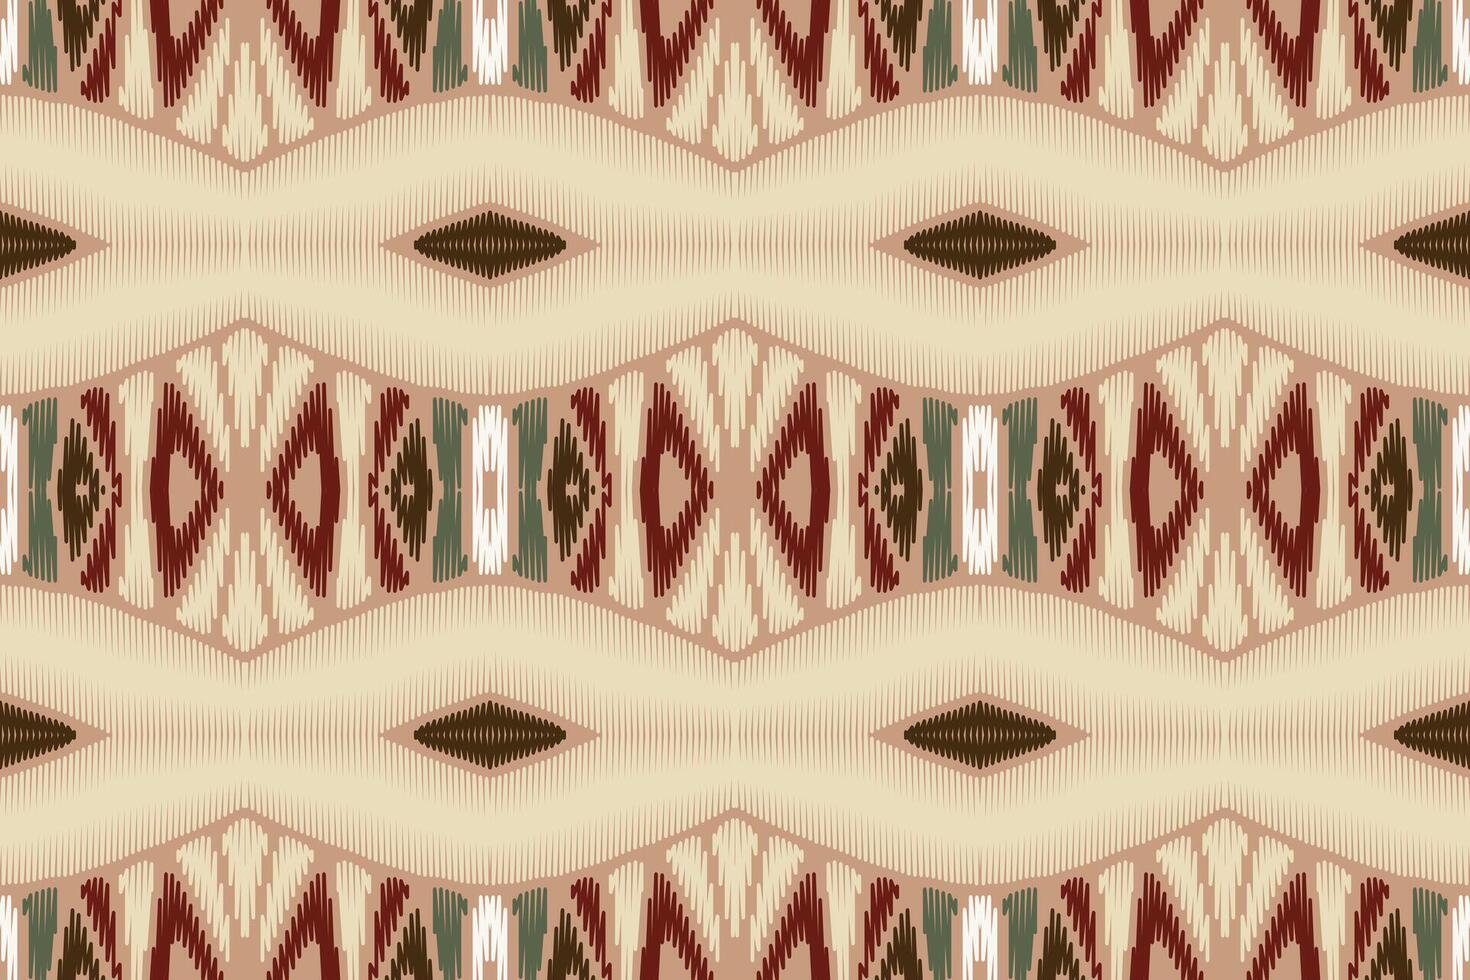 fabric ikat seamless pattern geometric ethnic traditional embroidery style.Design for background,carpet,mat,sarong,clothing,Vector illustration. vector